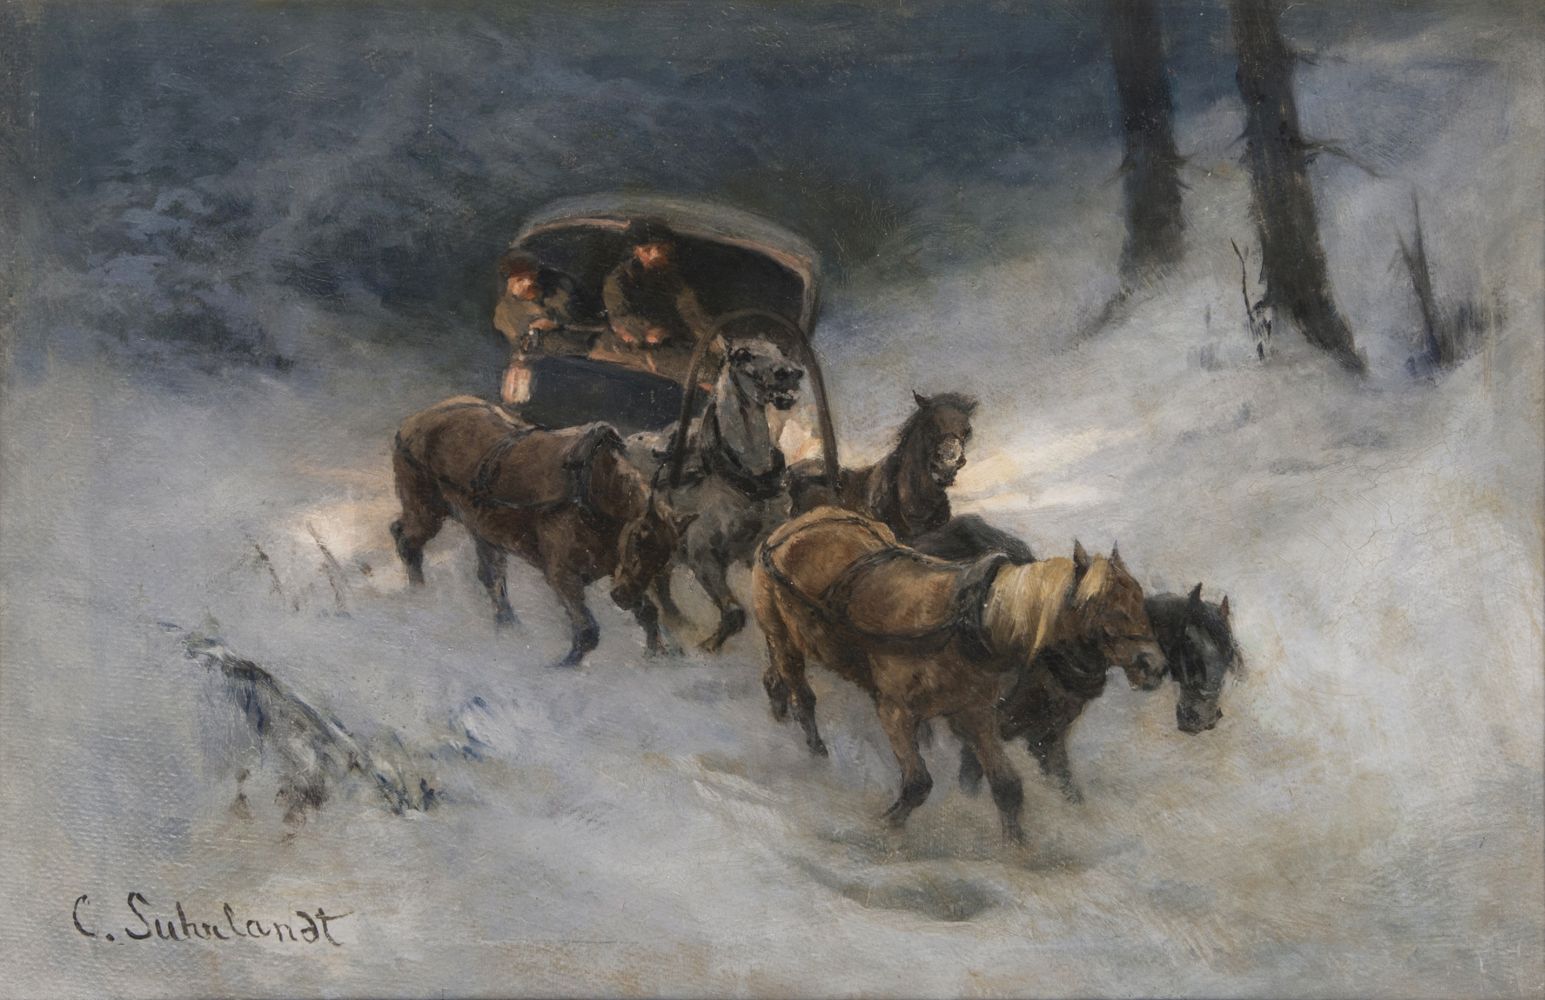 Carriage drawn by horses in a snowy forest